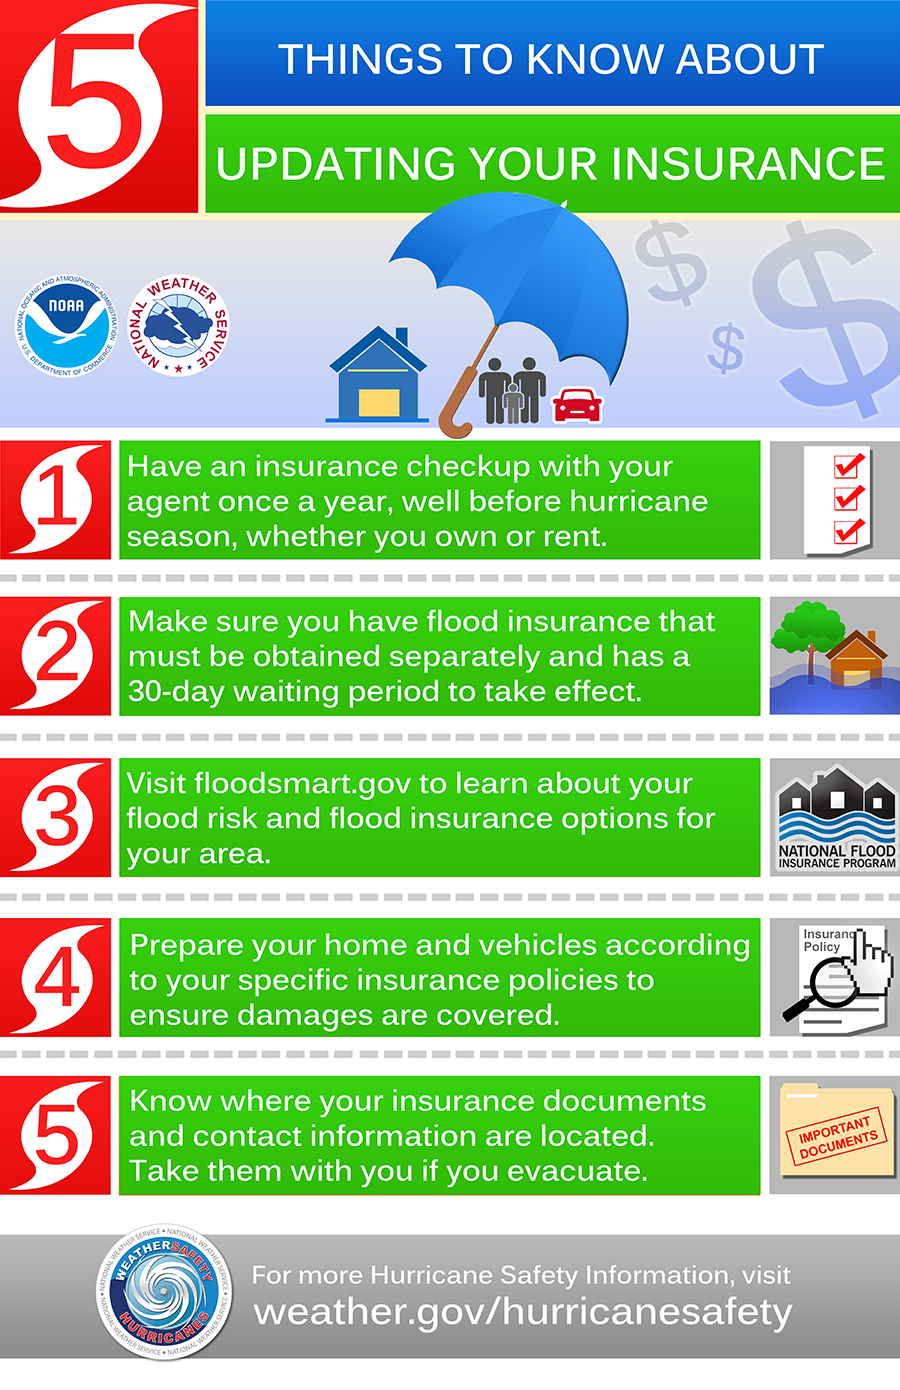 Things to know about updating your insurance